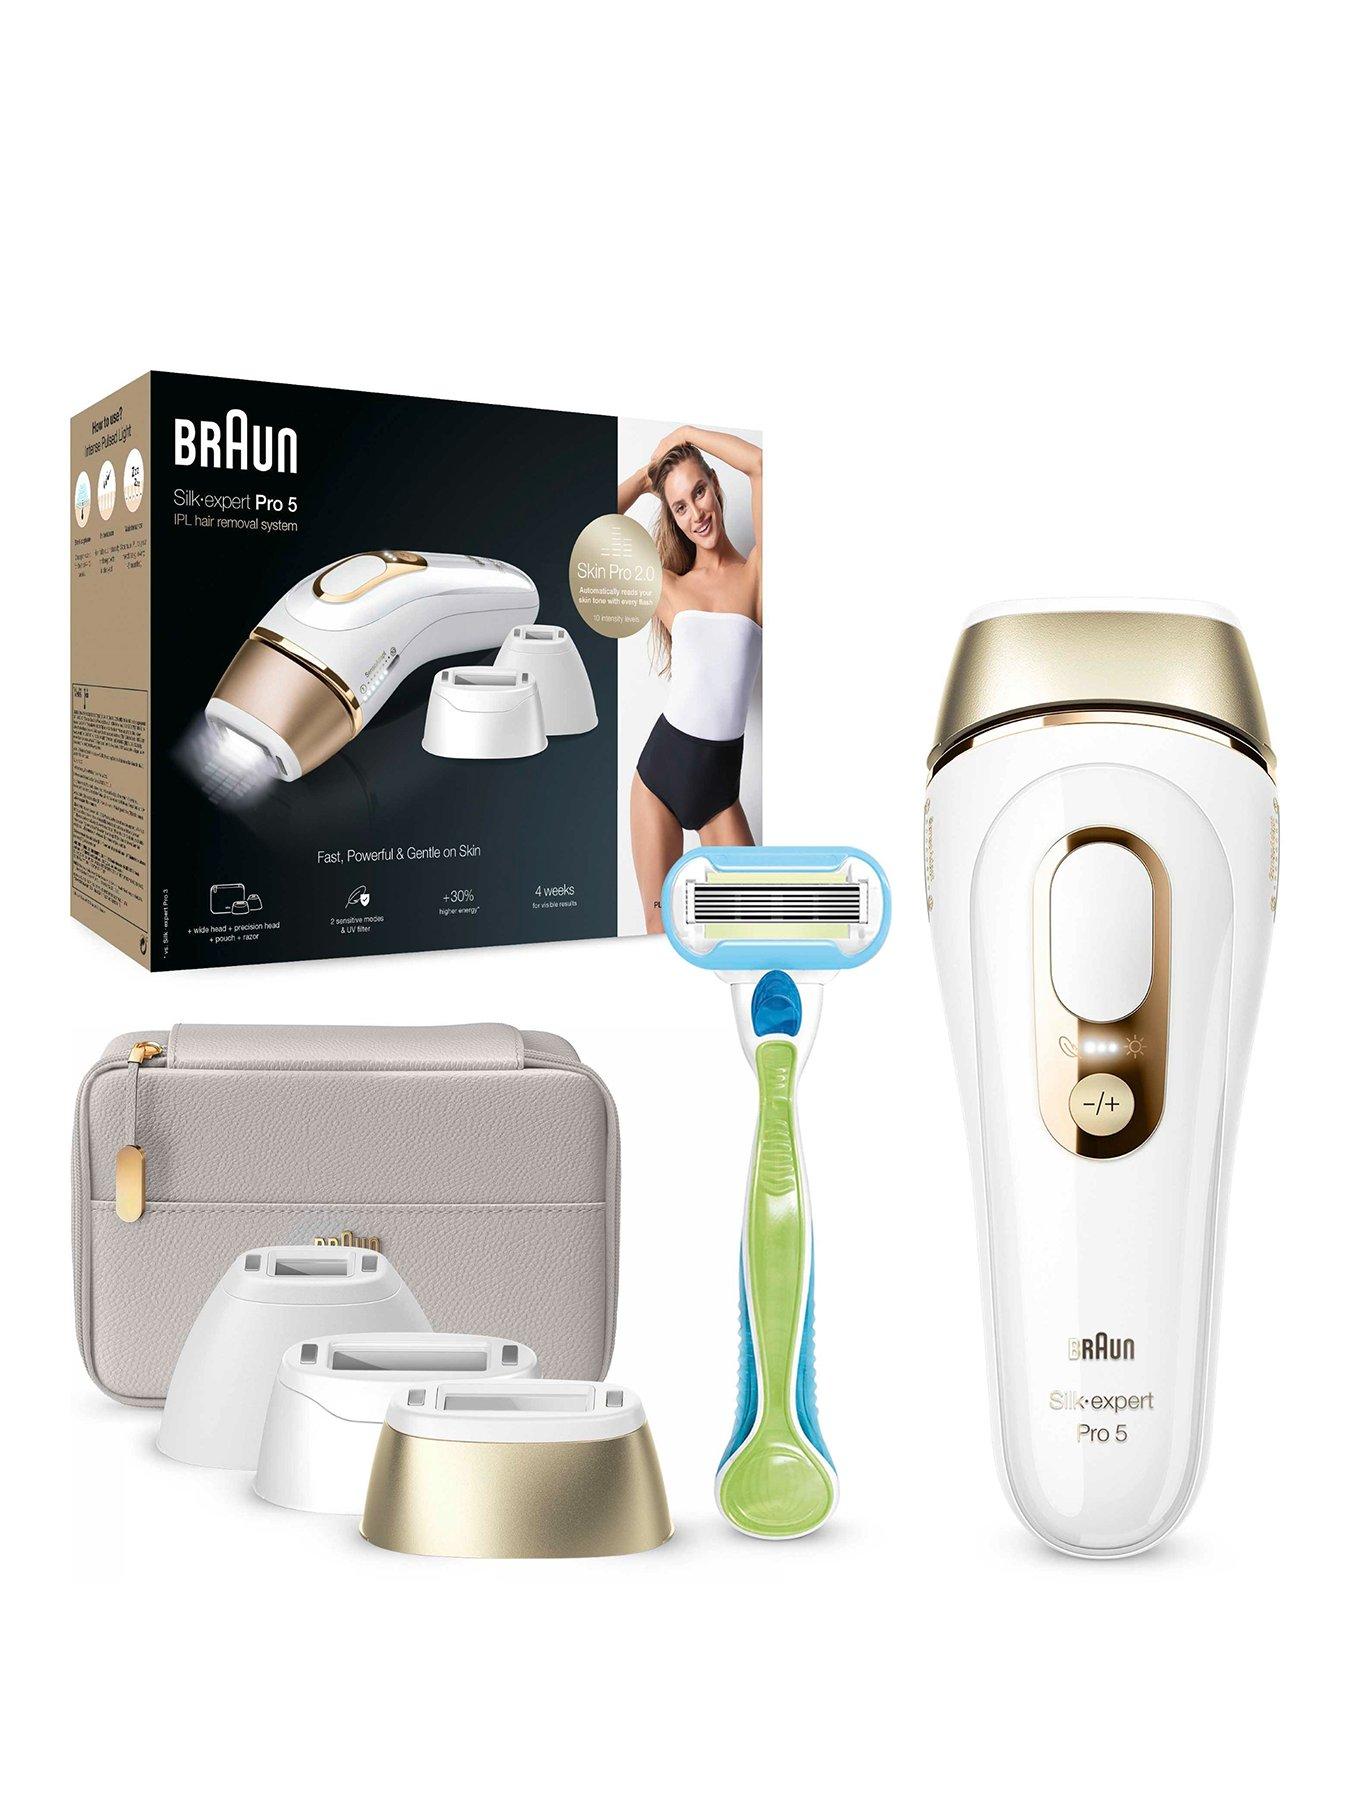 Braun Silk Expert Pro 5 IPL drops to its lowest price for Black